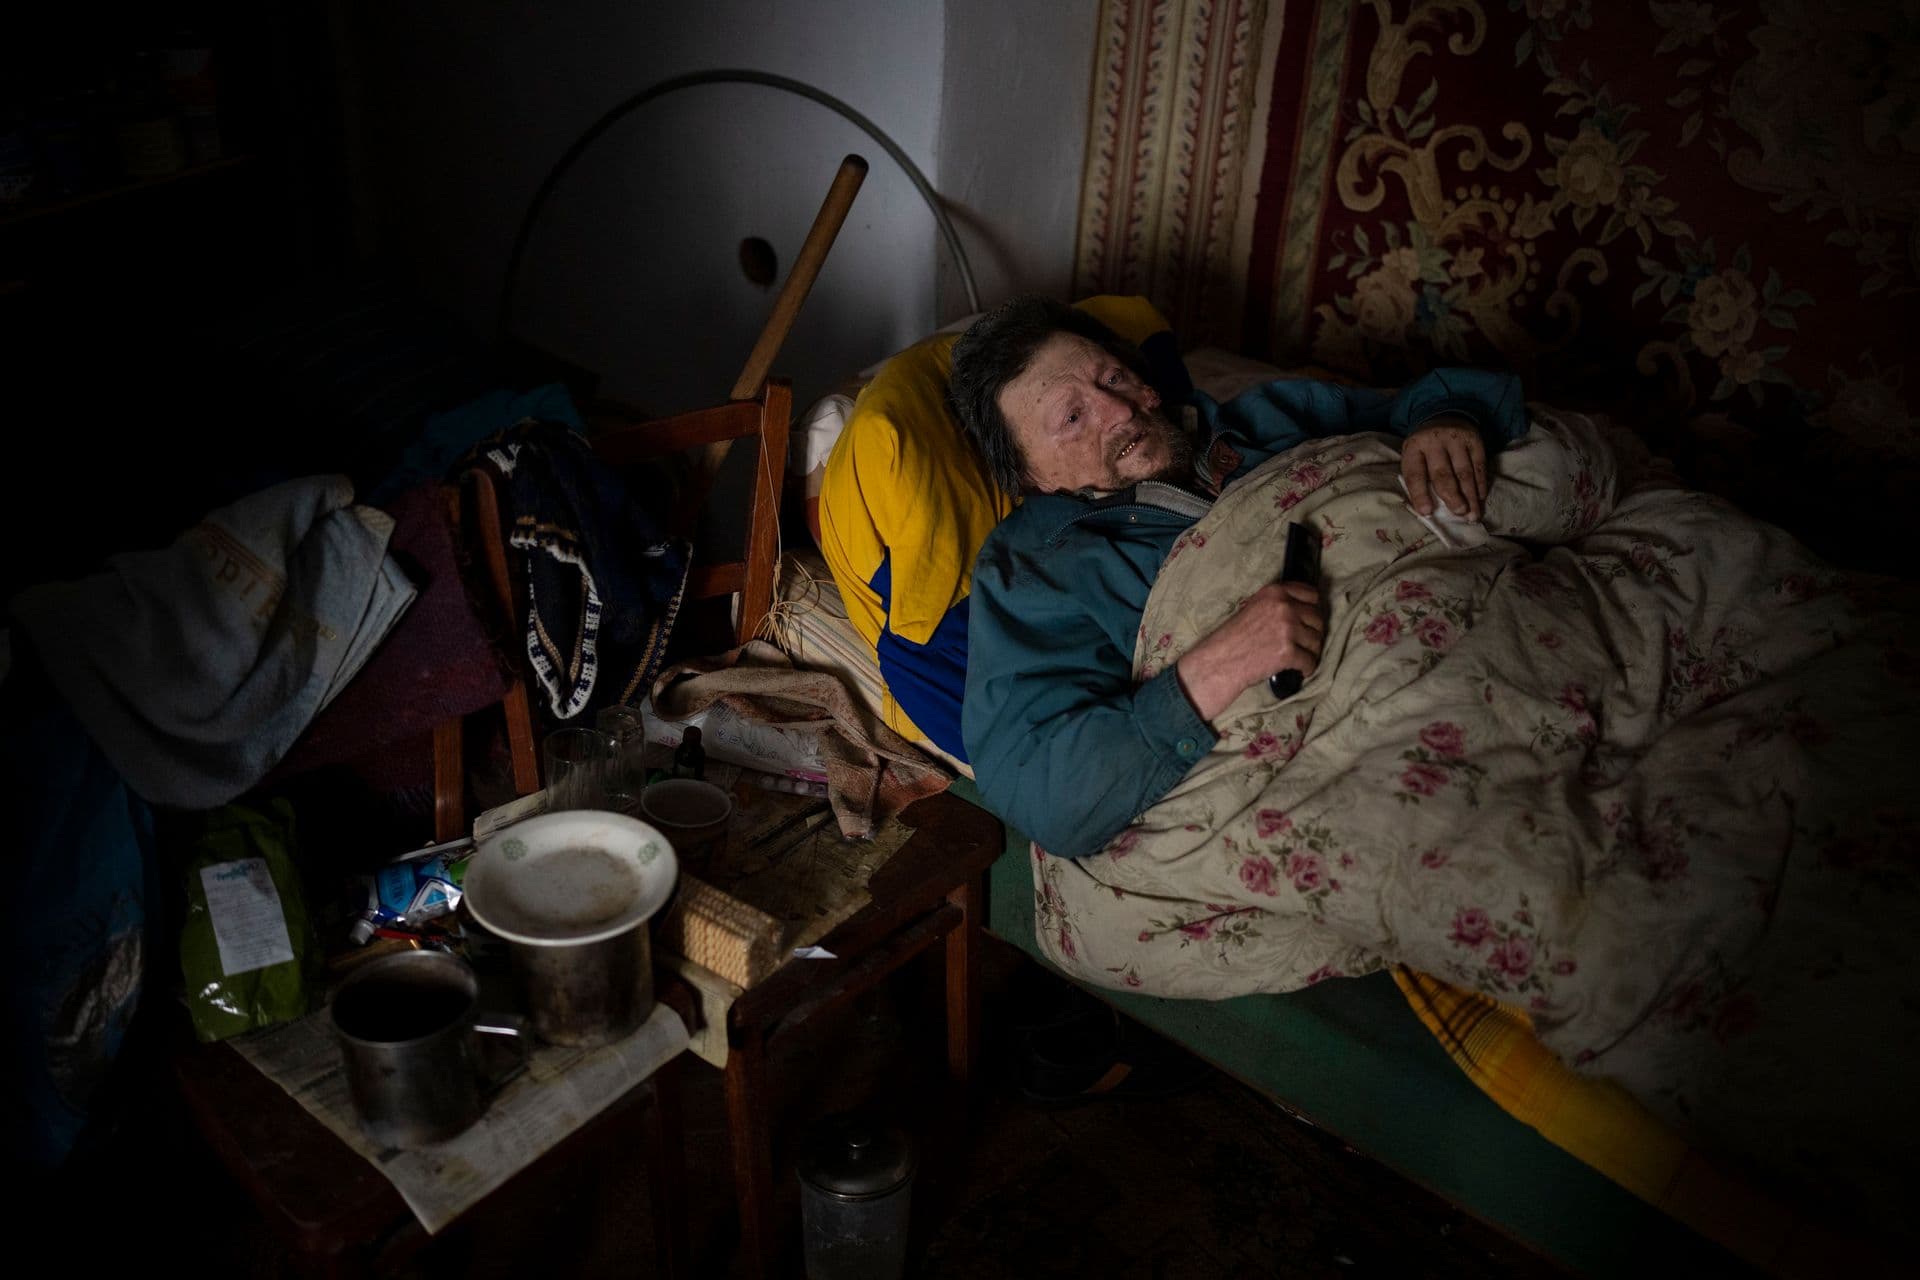 Suffering from cancer, Gennadiy Shaposhnikov, 83, rests in his partially destroyed home which was hit by Russian shelling last fall in Kalynivske